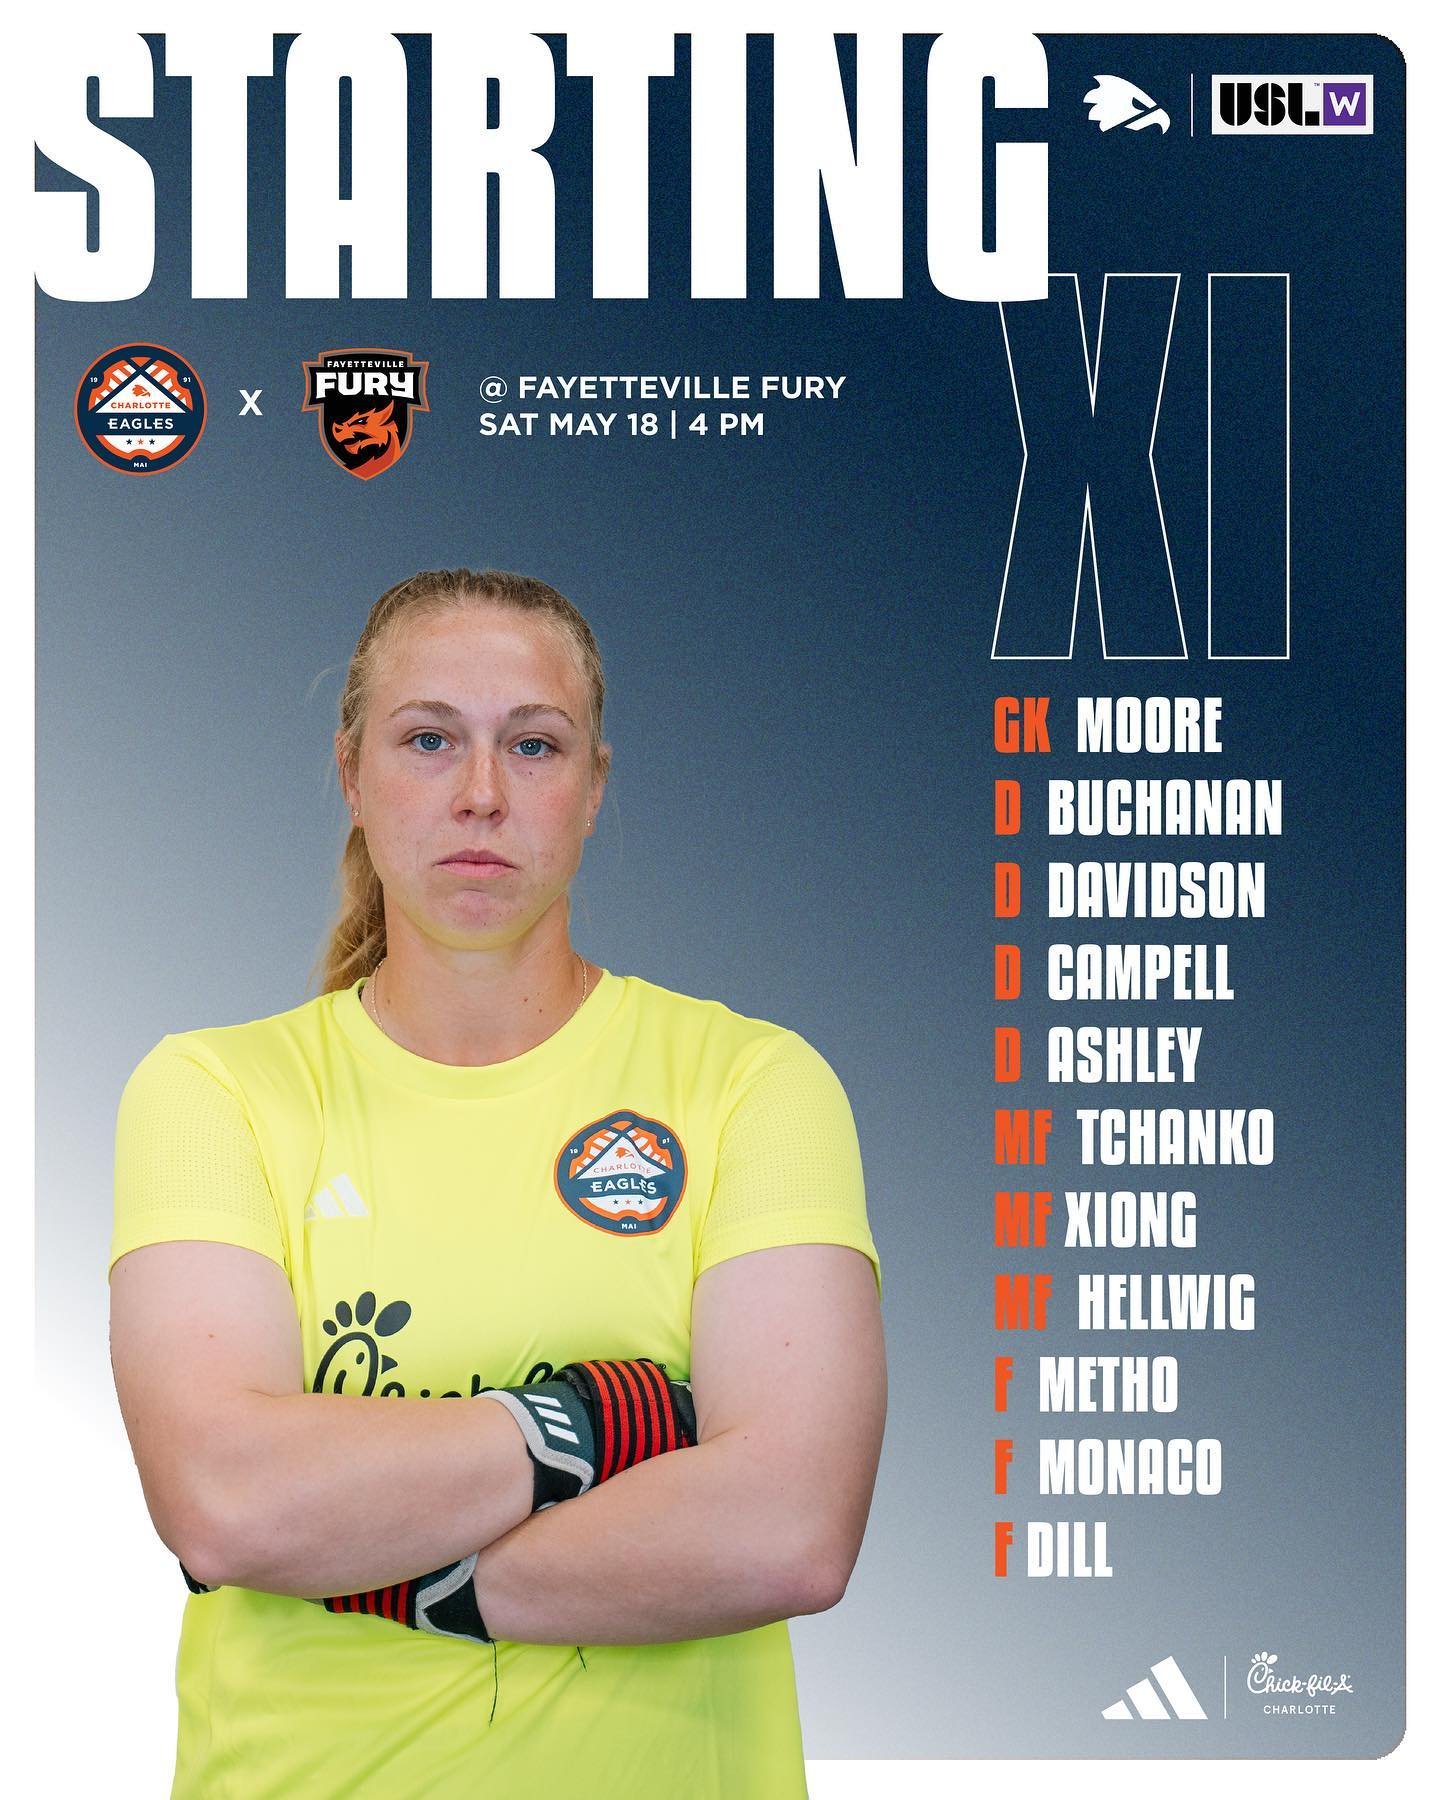 🦅 STARTING XI 🦅

Your staring lineup for the FIRST Lady Eagles games of the season! 

USL W League tonight @ 4:00 pm

WPSL tonight @ 7:00 pm

#SoliDeoGloria